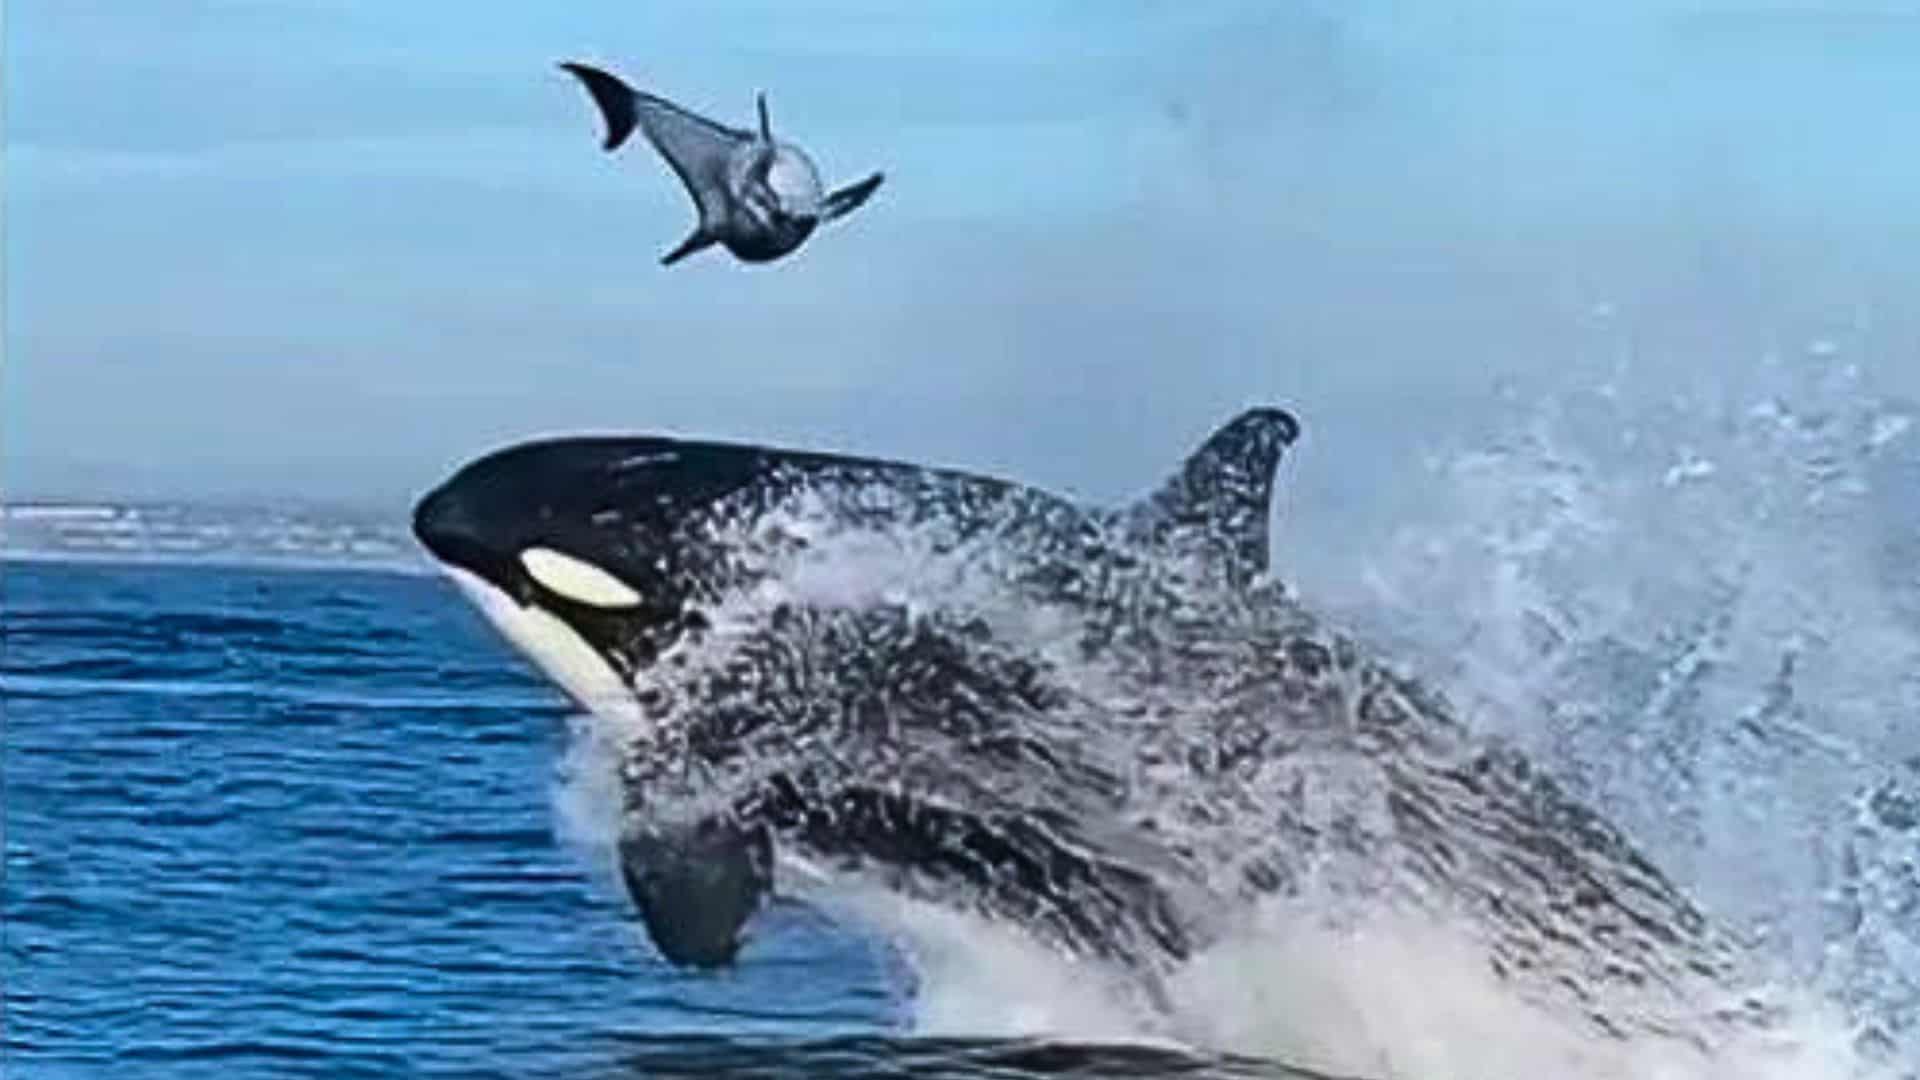 <p>Yes, orcas have a tall, triangular dorsal fin, which can be up to 6 feet tall in males. </p>           Sharks, lions, tigers, as well as all about cats & dogs!           <a href='https://www.msn.com/en-us/channel/source/Animals%20Around%20The%20Globe%20US/sr-vid-ryujycftmyx7d7tmb5trkya28raxe6r56iuty5739ky2rf5d5wws?ocid=anaheim-ntp-following&cvid=1ff21e393be1475a8b3dd9a83a86b8df&ei=10'>           Click here to get to the Animals Around The Globe profile page</a><b> and hit "Follow" to never miss out.</b>